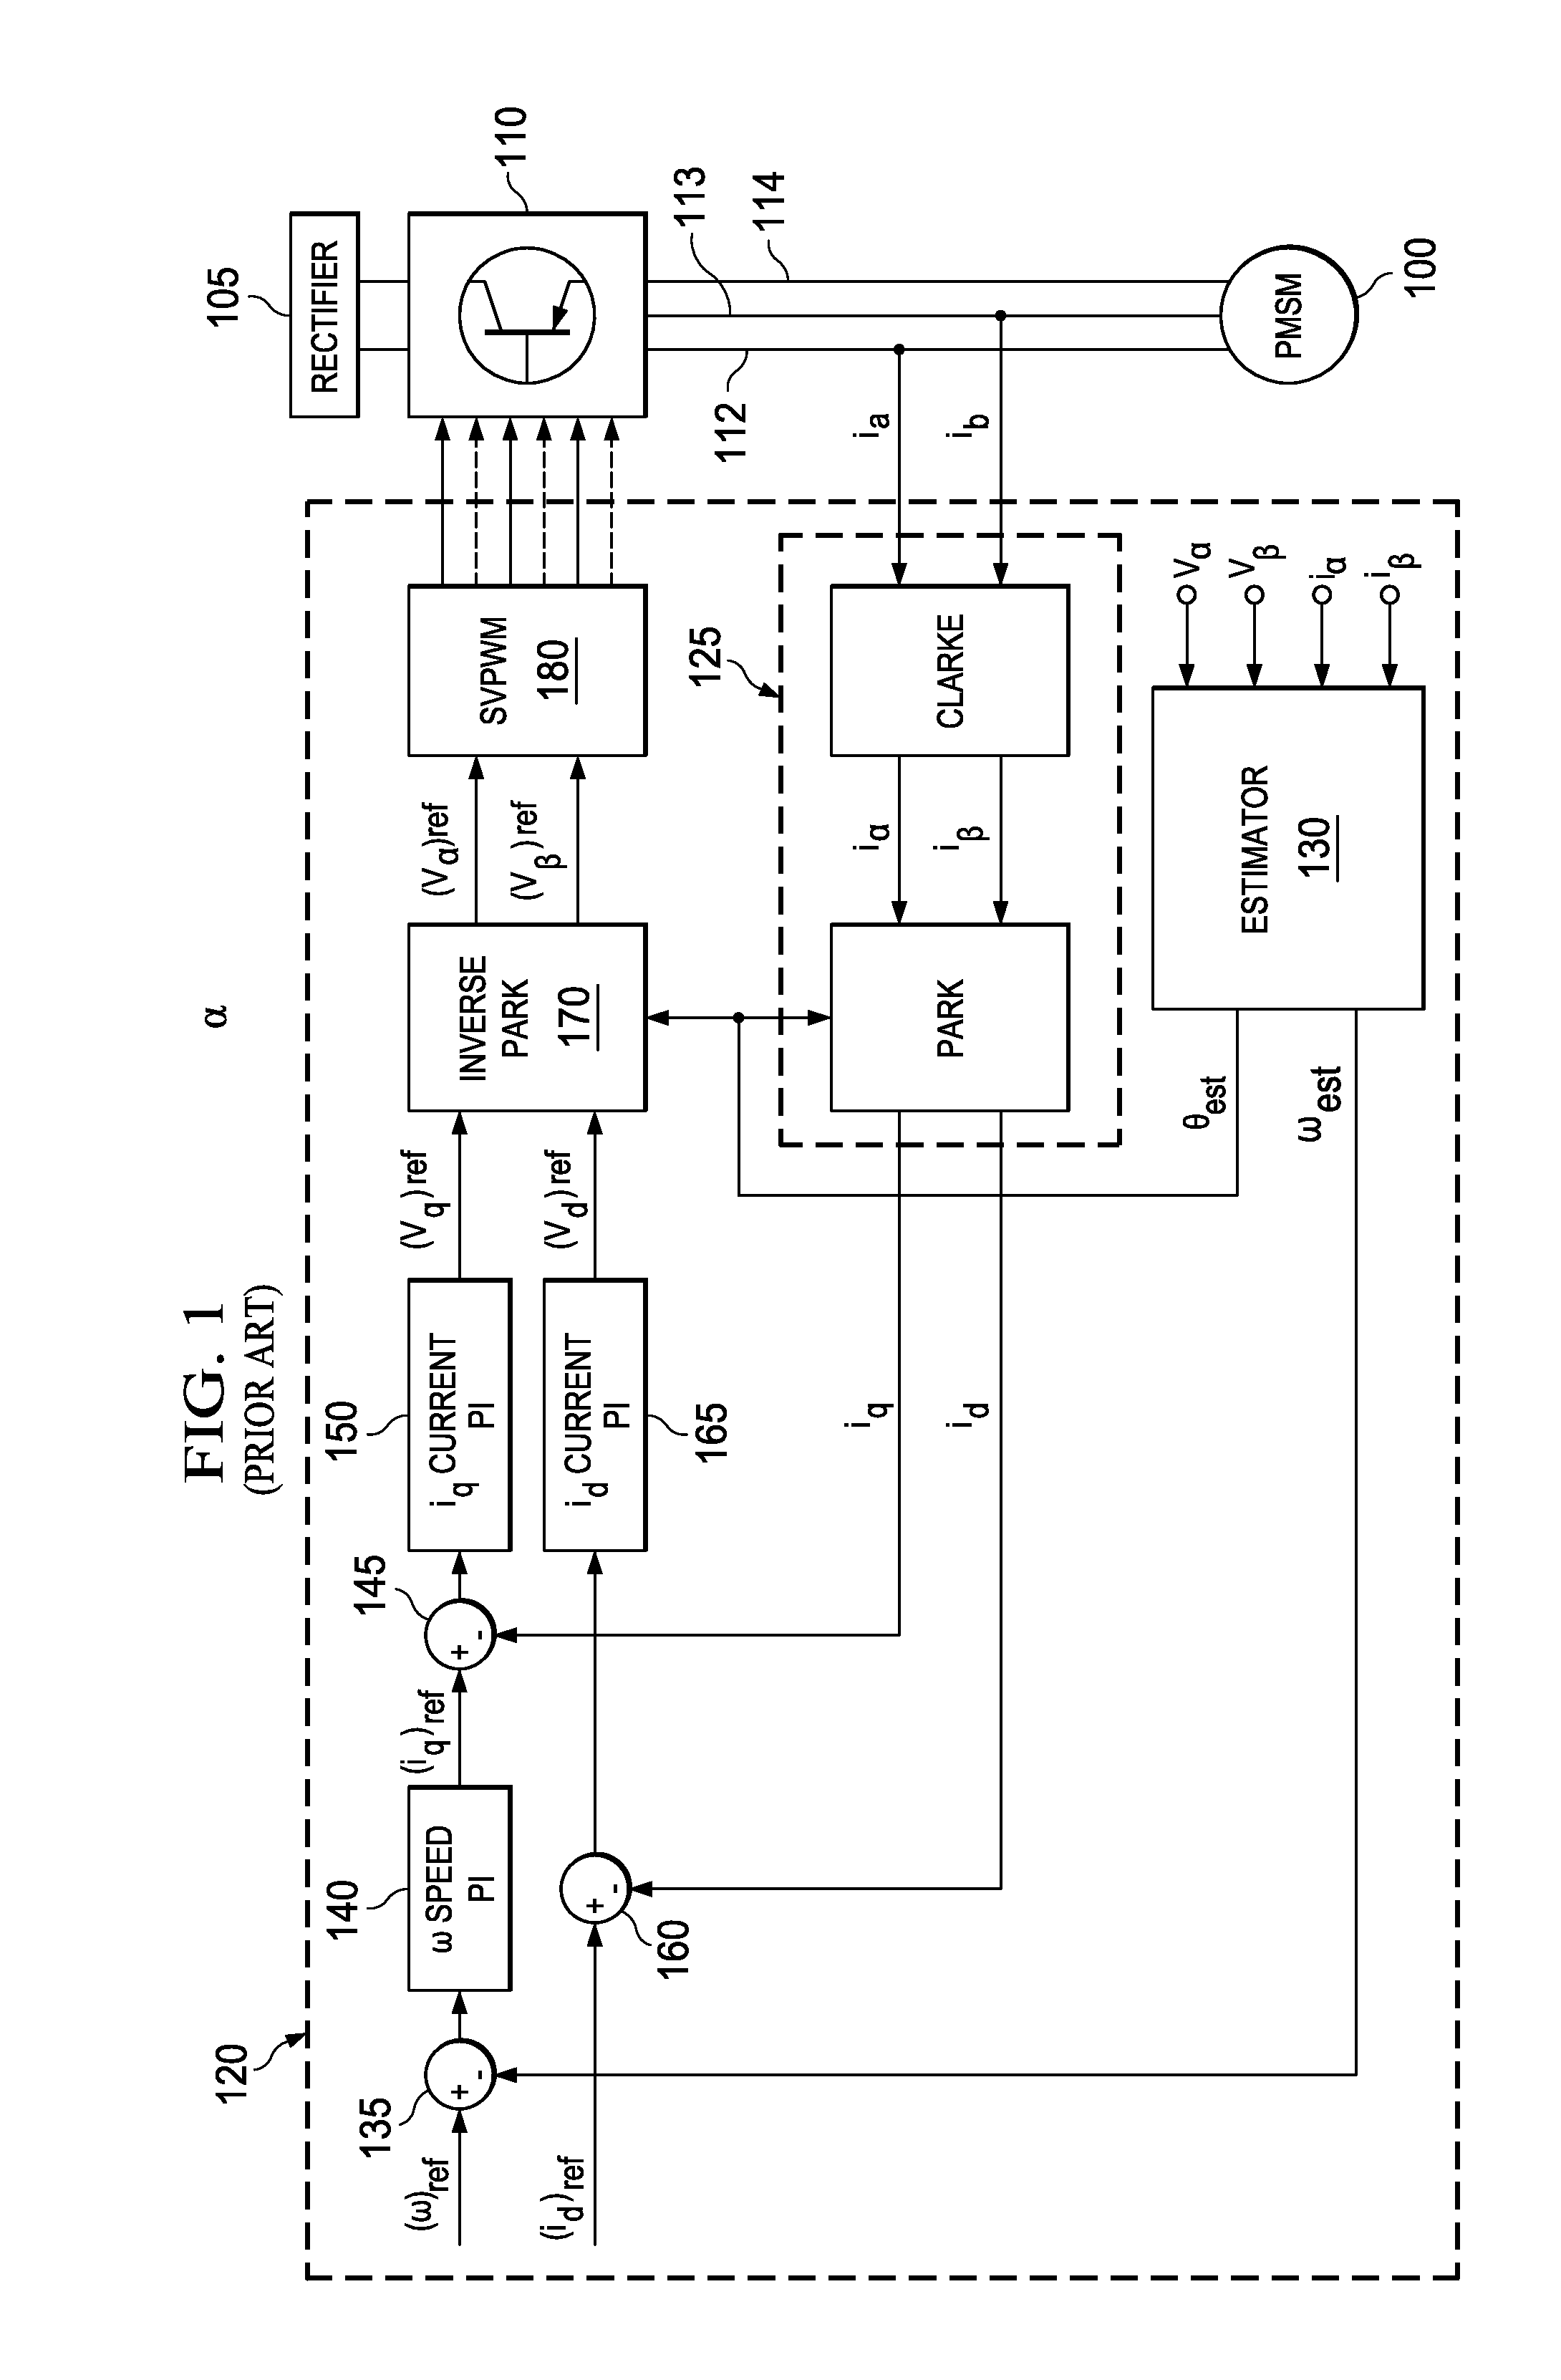 Automated Motor Control